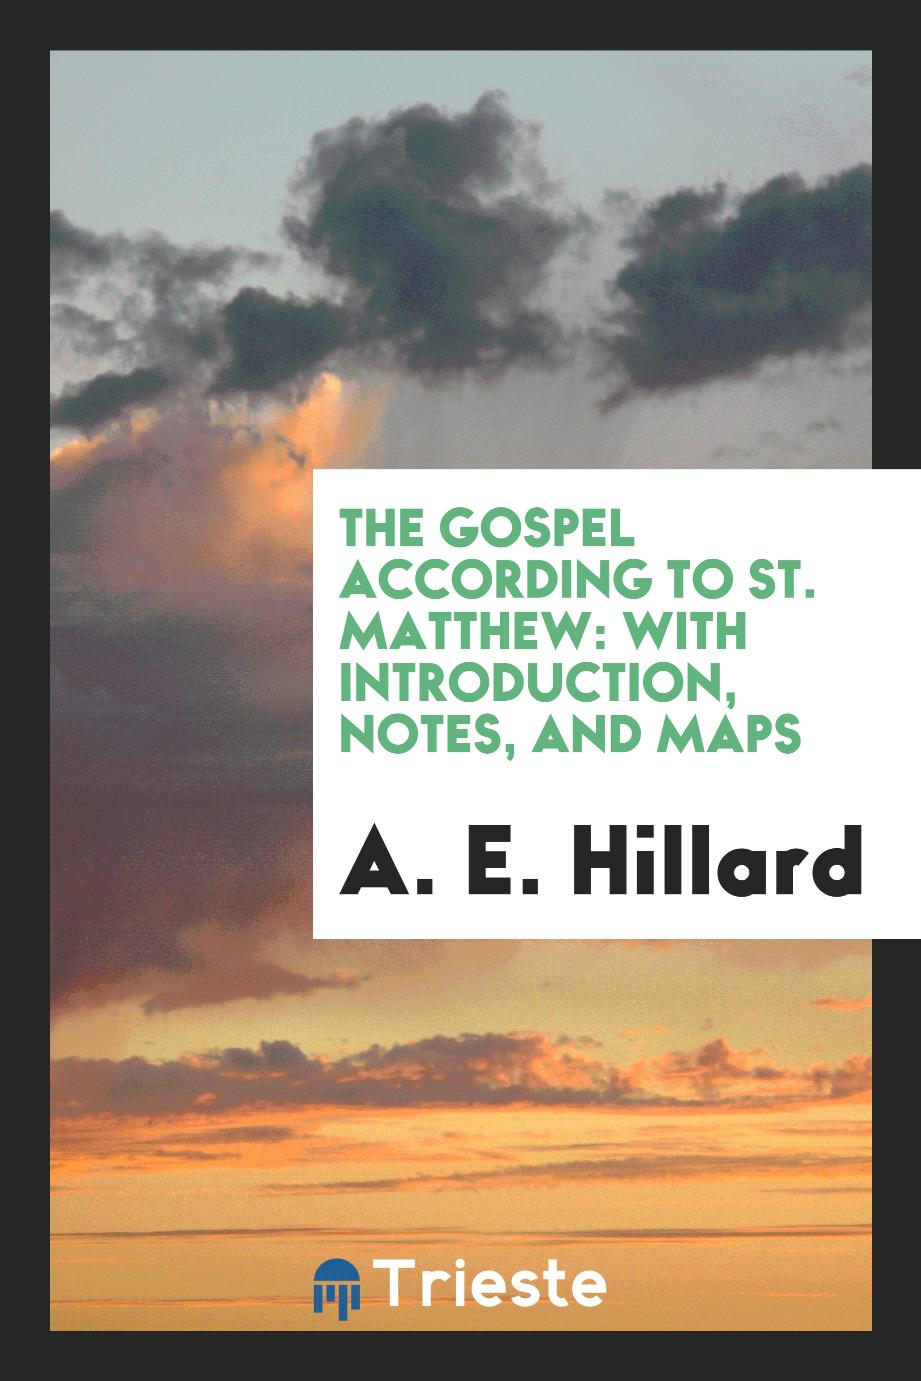 The Gospel According to St. Matthew: With Introduction, Notes, and Maps